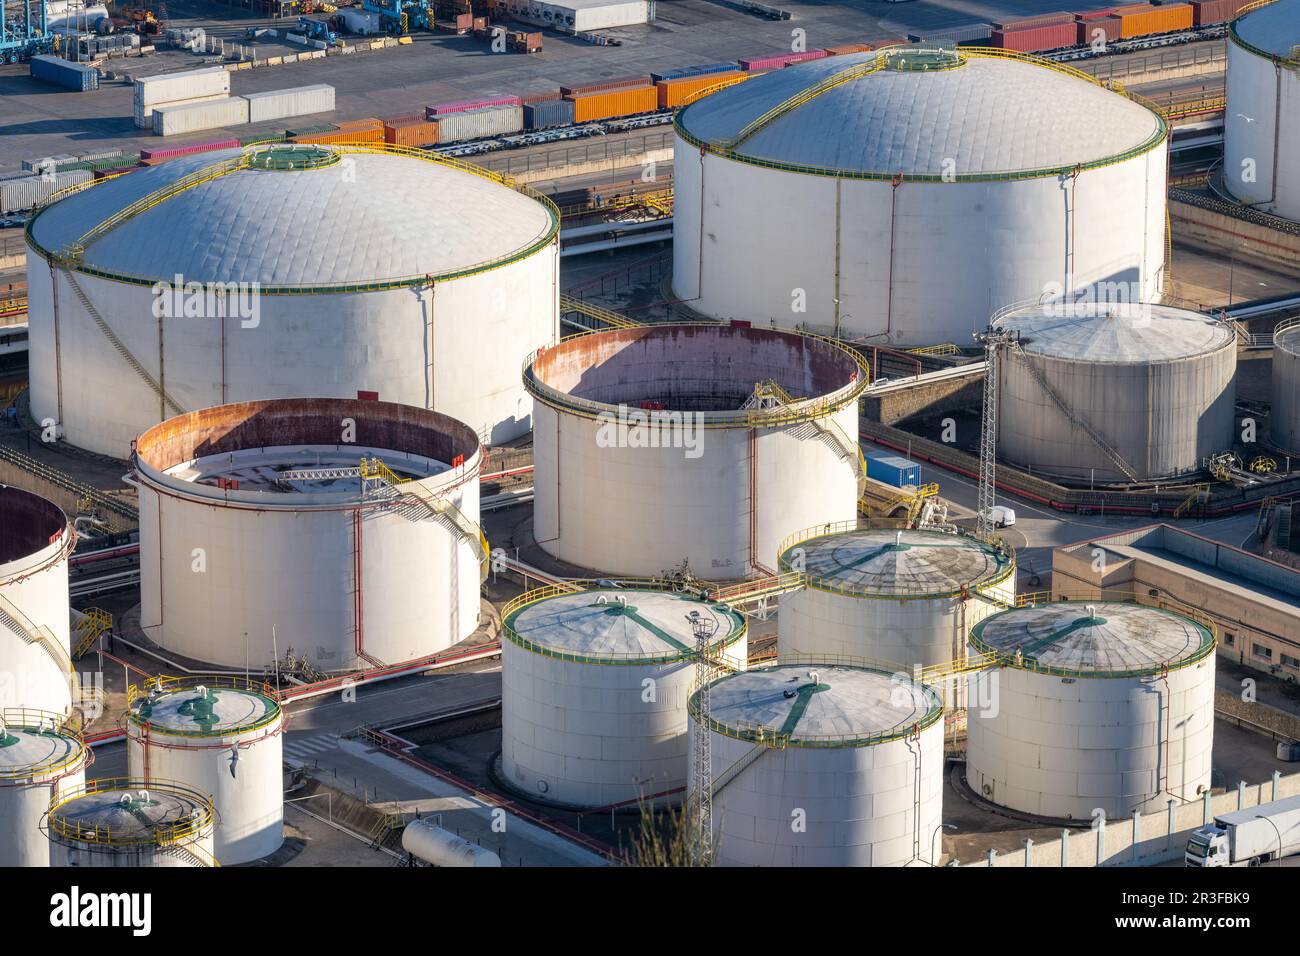 Storage tanks for crude oil seen in the commercial port of Barcelona Stock Photo